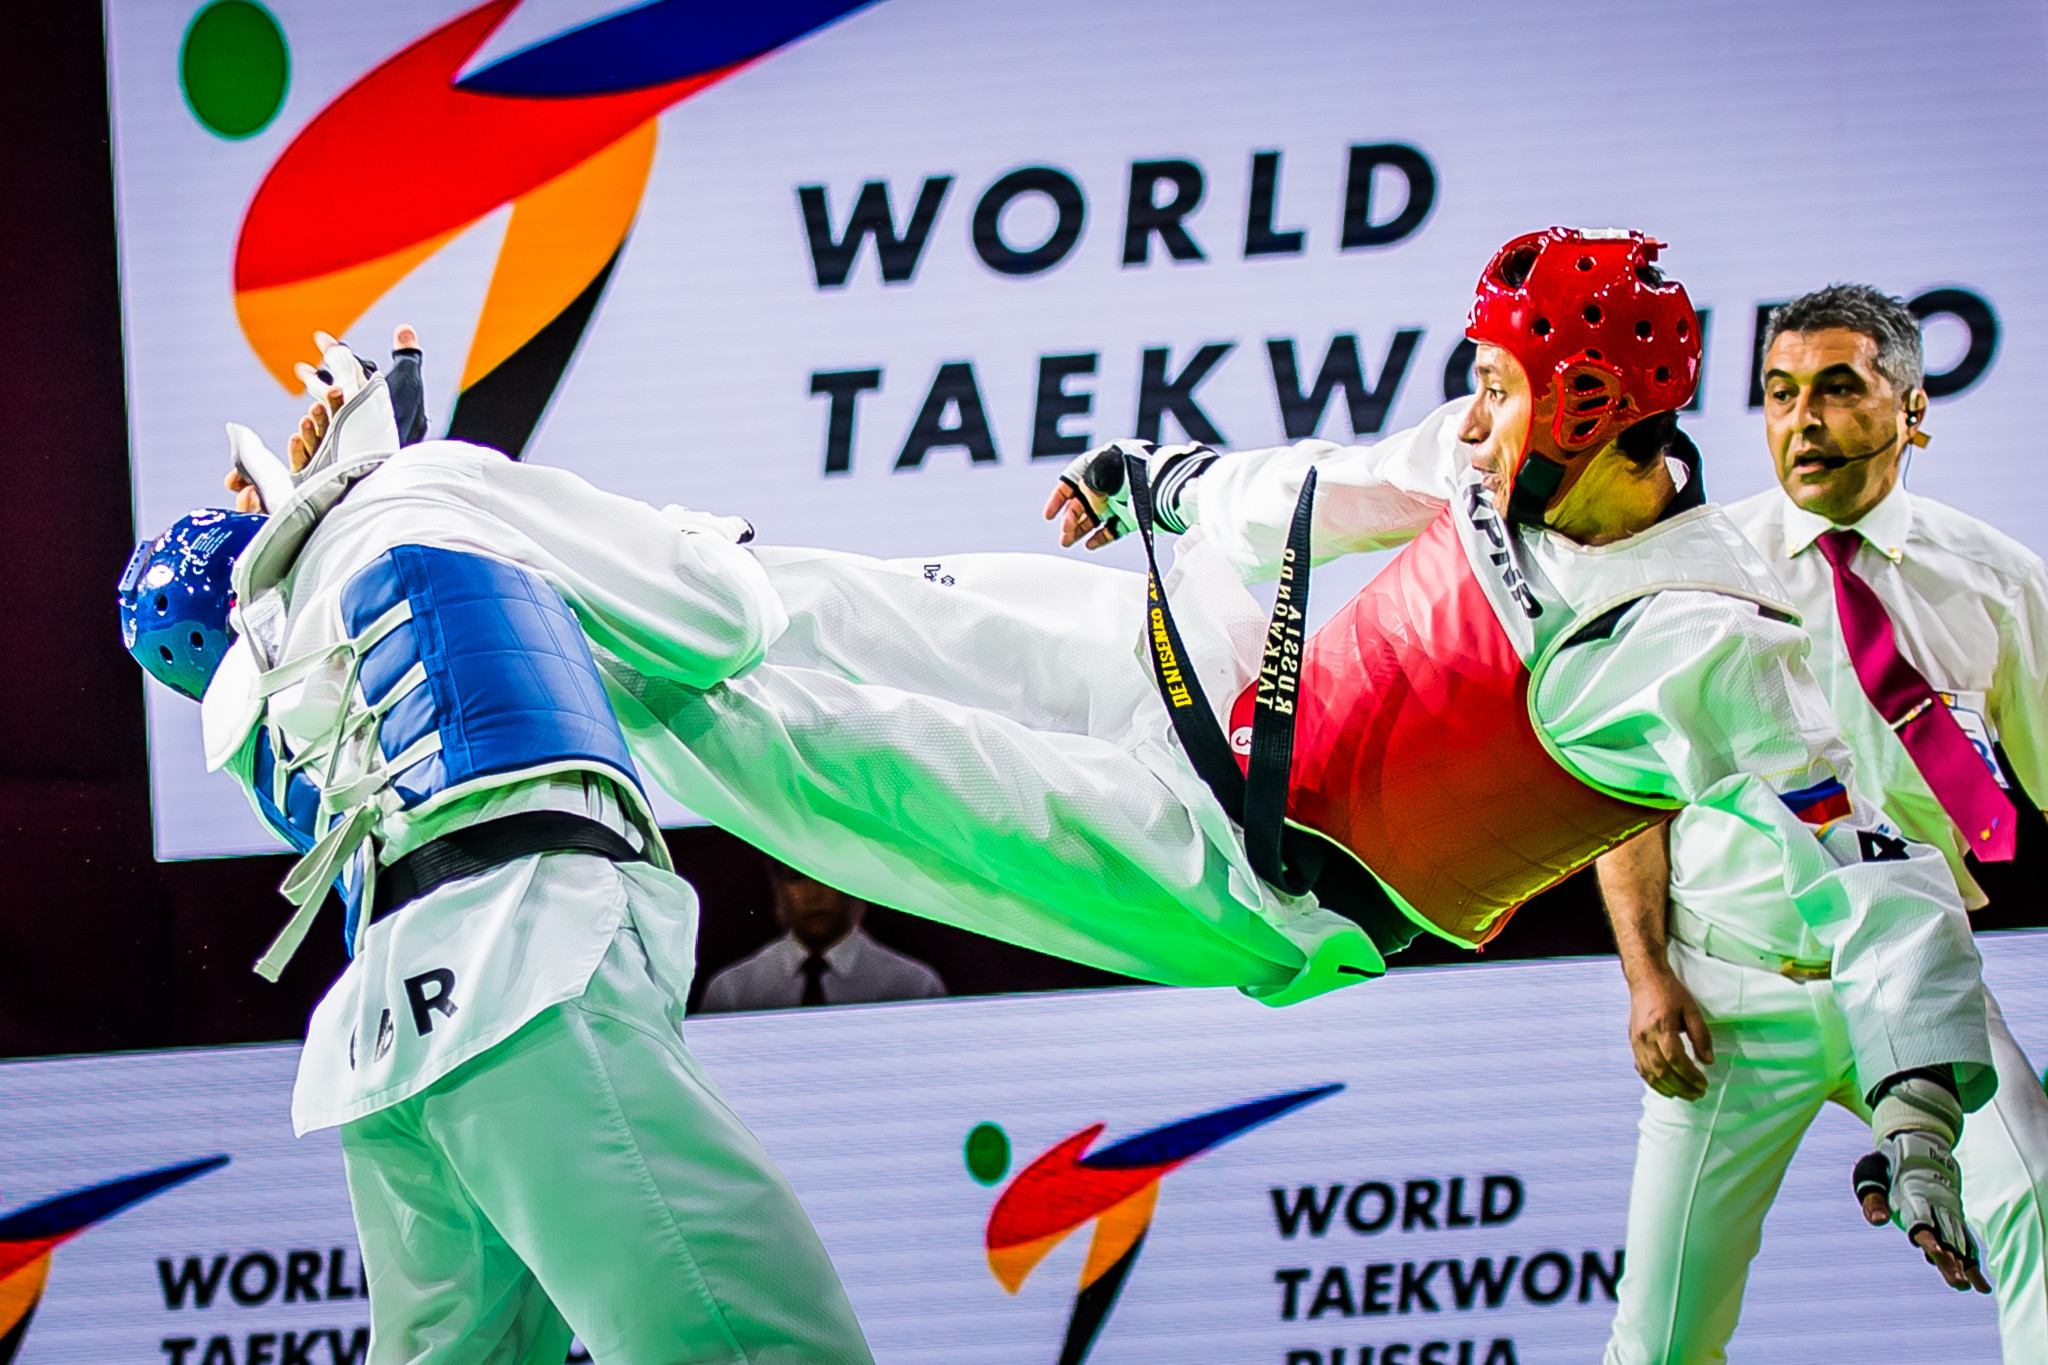 Russia’s Alexey Denisenko delighted the home crowd by claiming the men’s under-68 kilograms gold medal on the first day of action at the World Taekwondo Grand Prix series leg in Moscow ©World Taekwondo